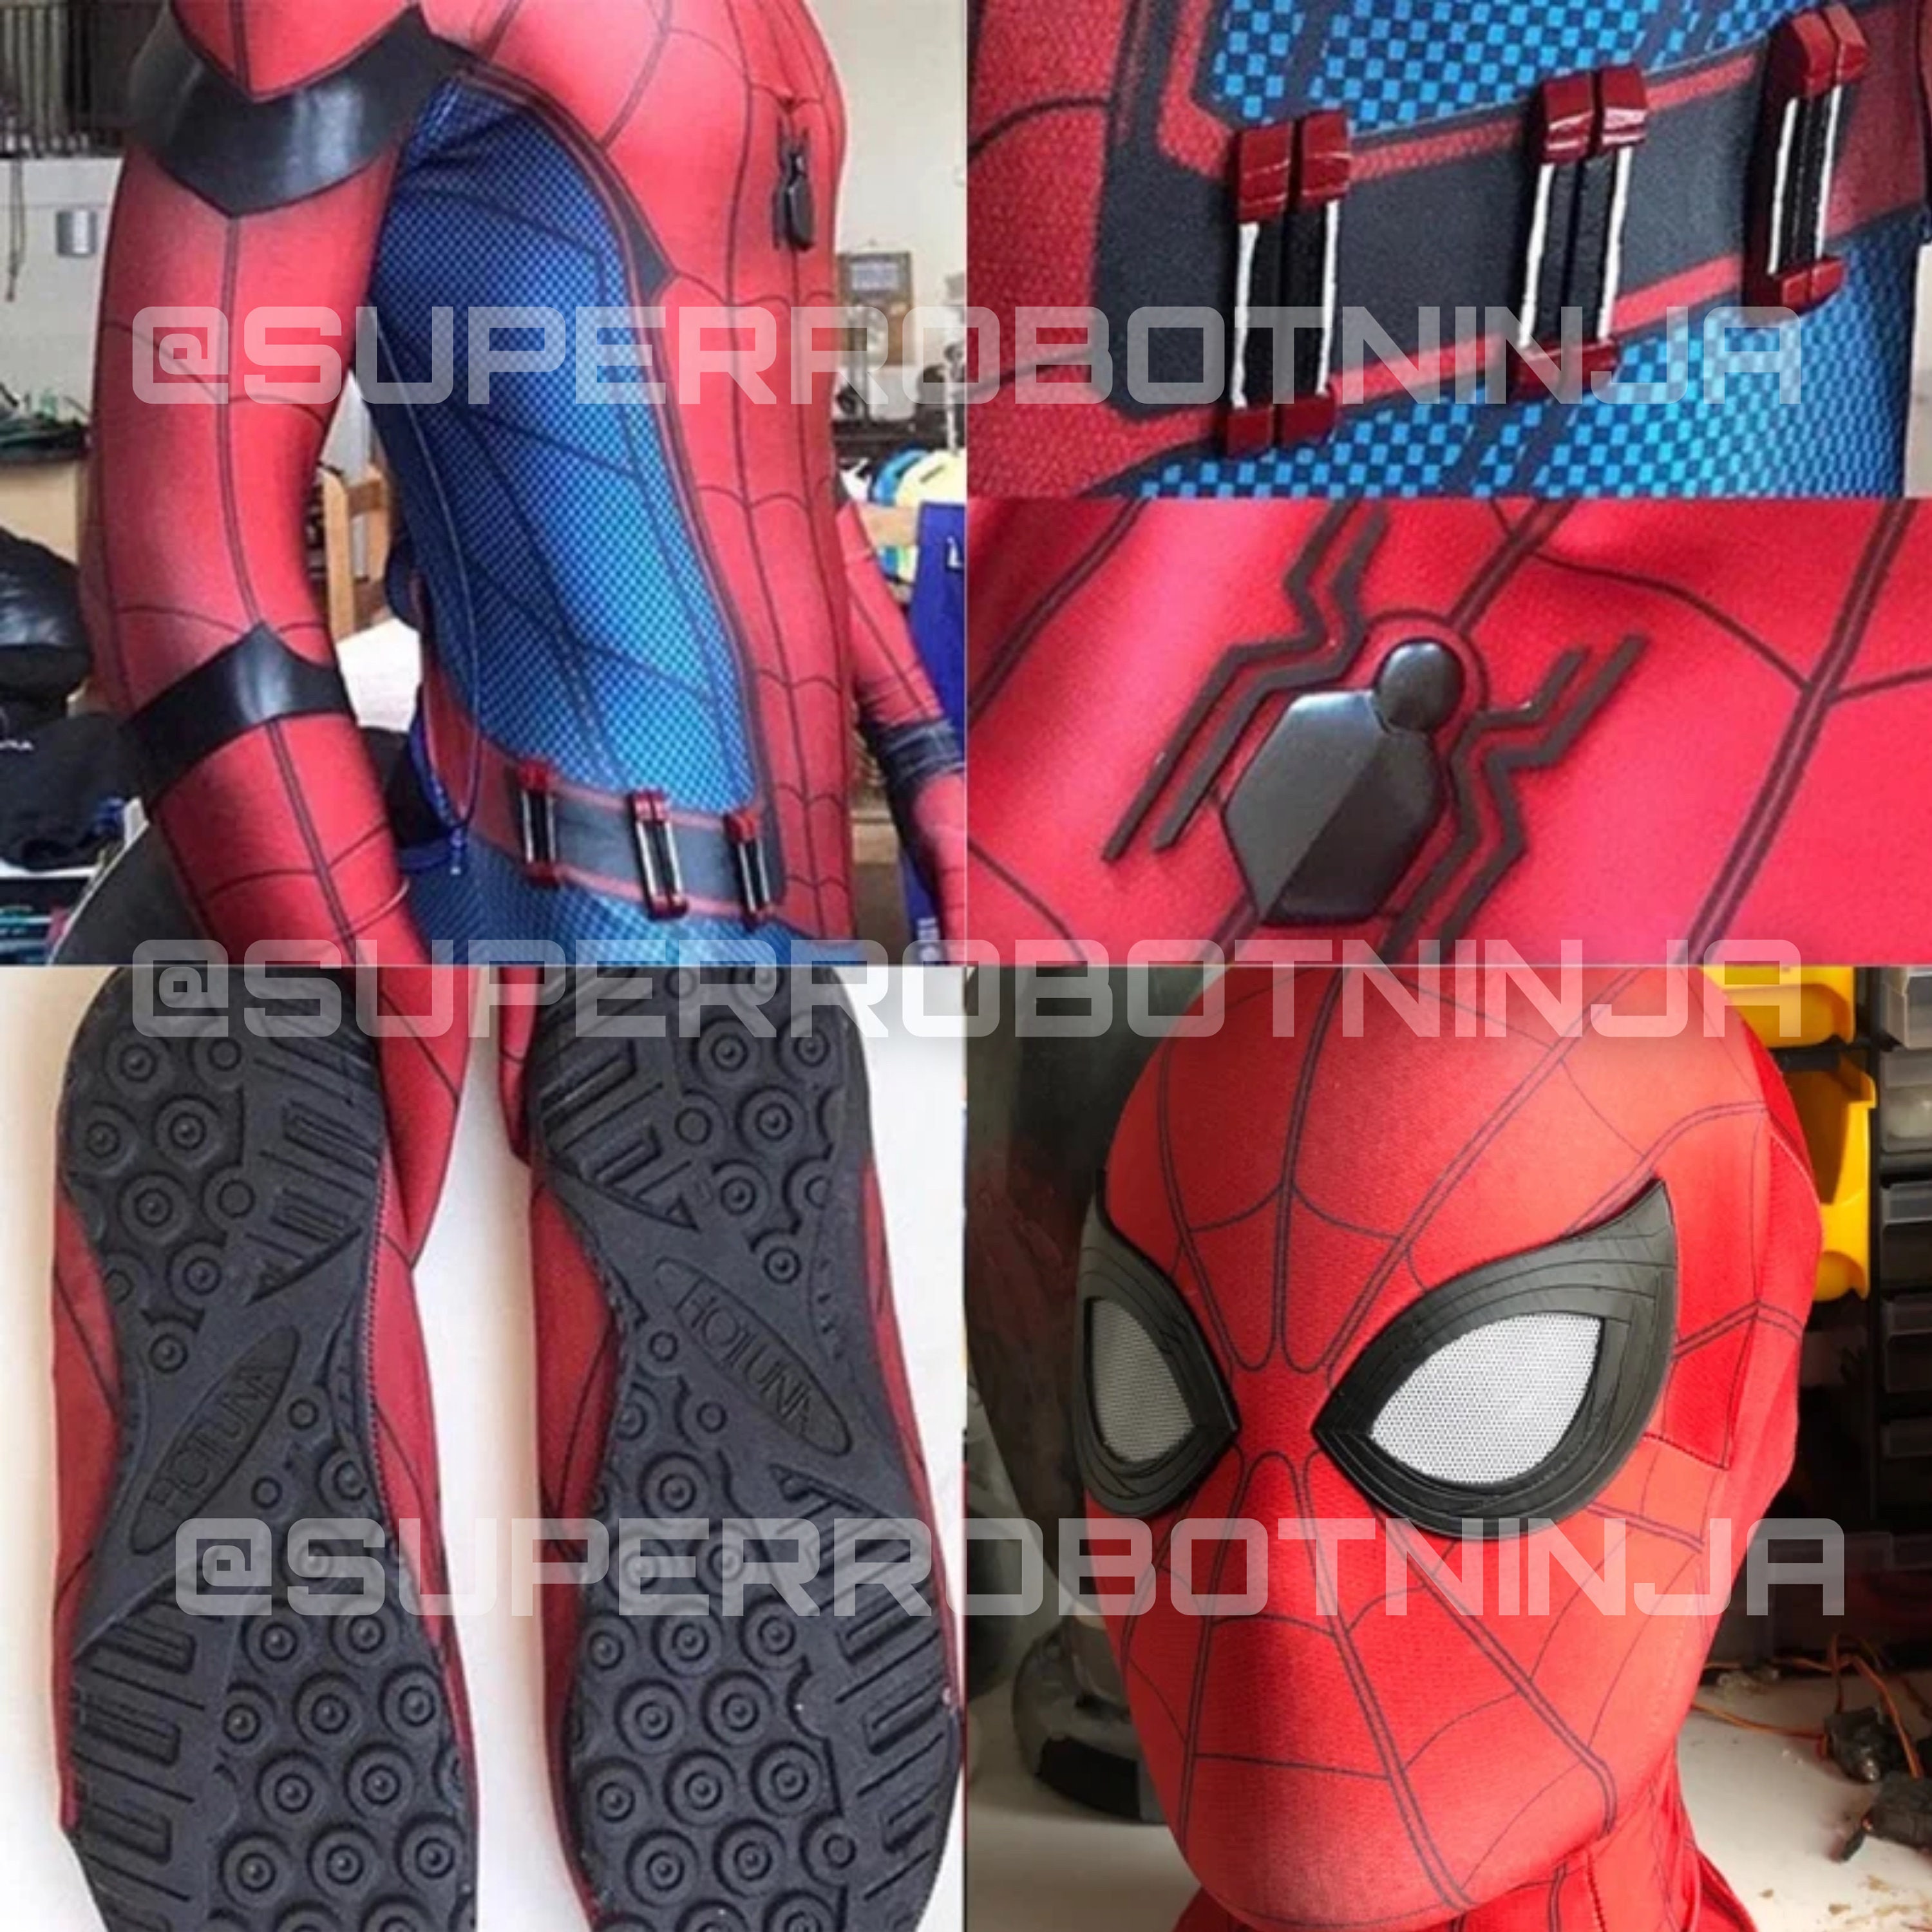 Anyone else get an Amazing Spiderman with this patch sewed into the fabric  of the back of the suit? : r/hottoys